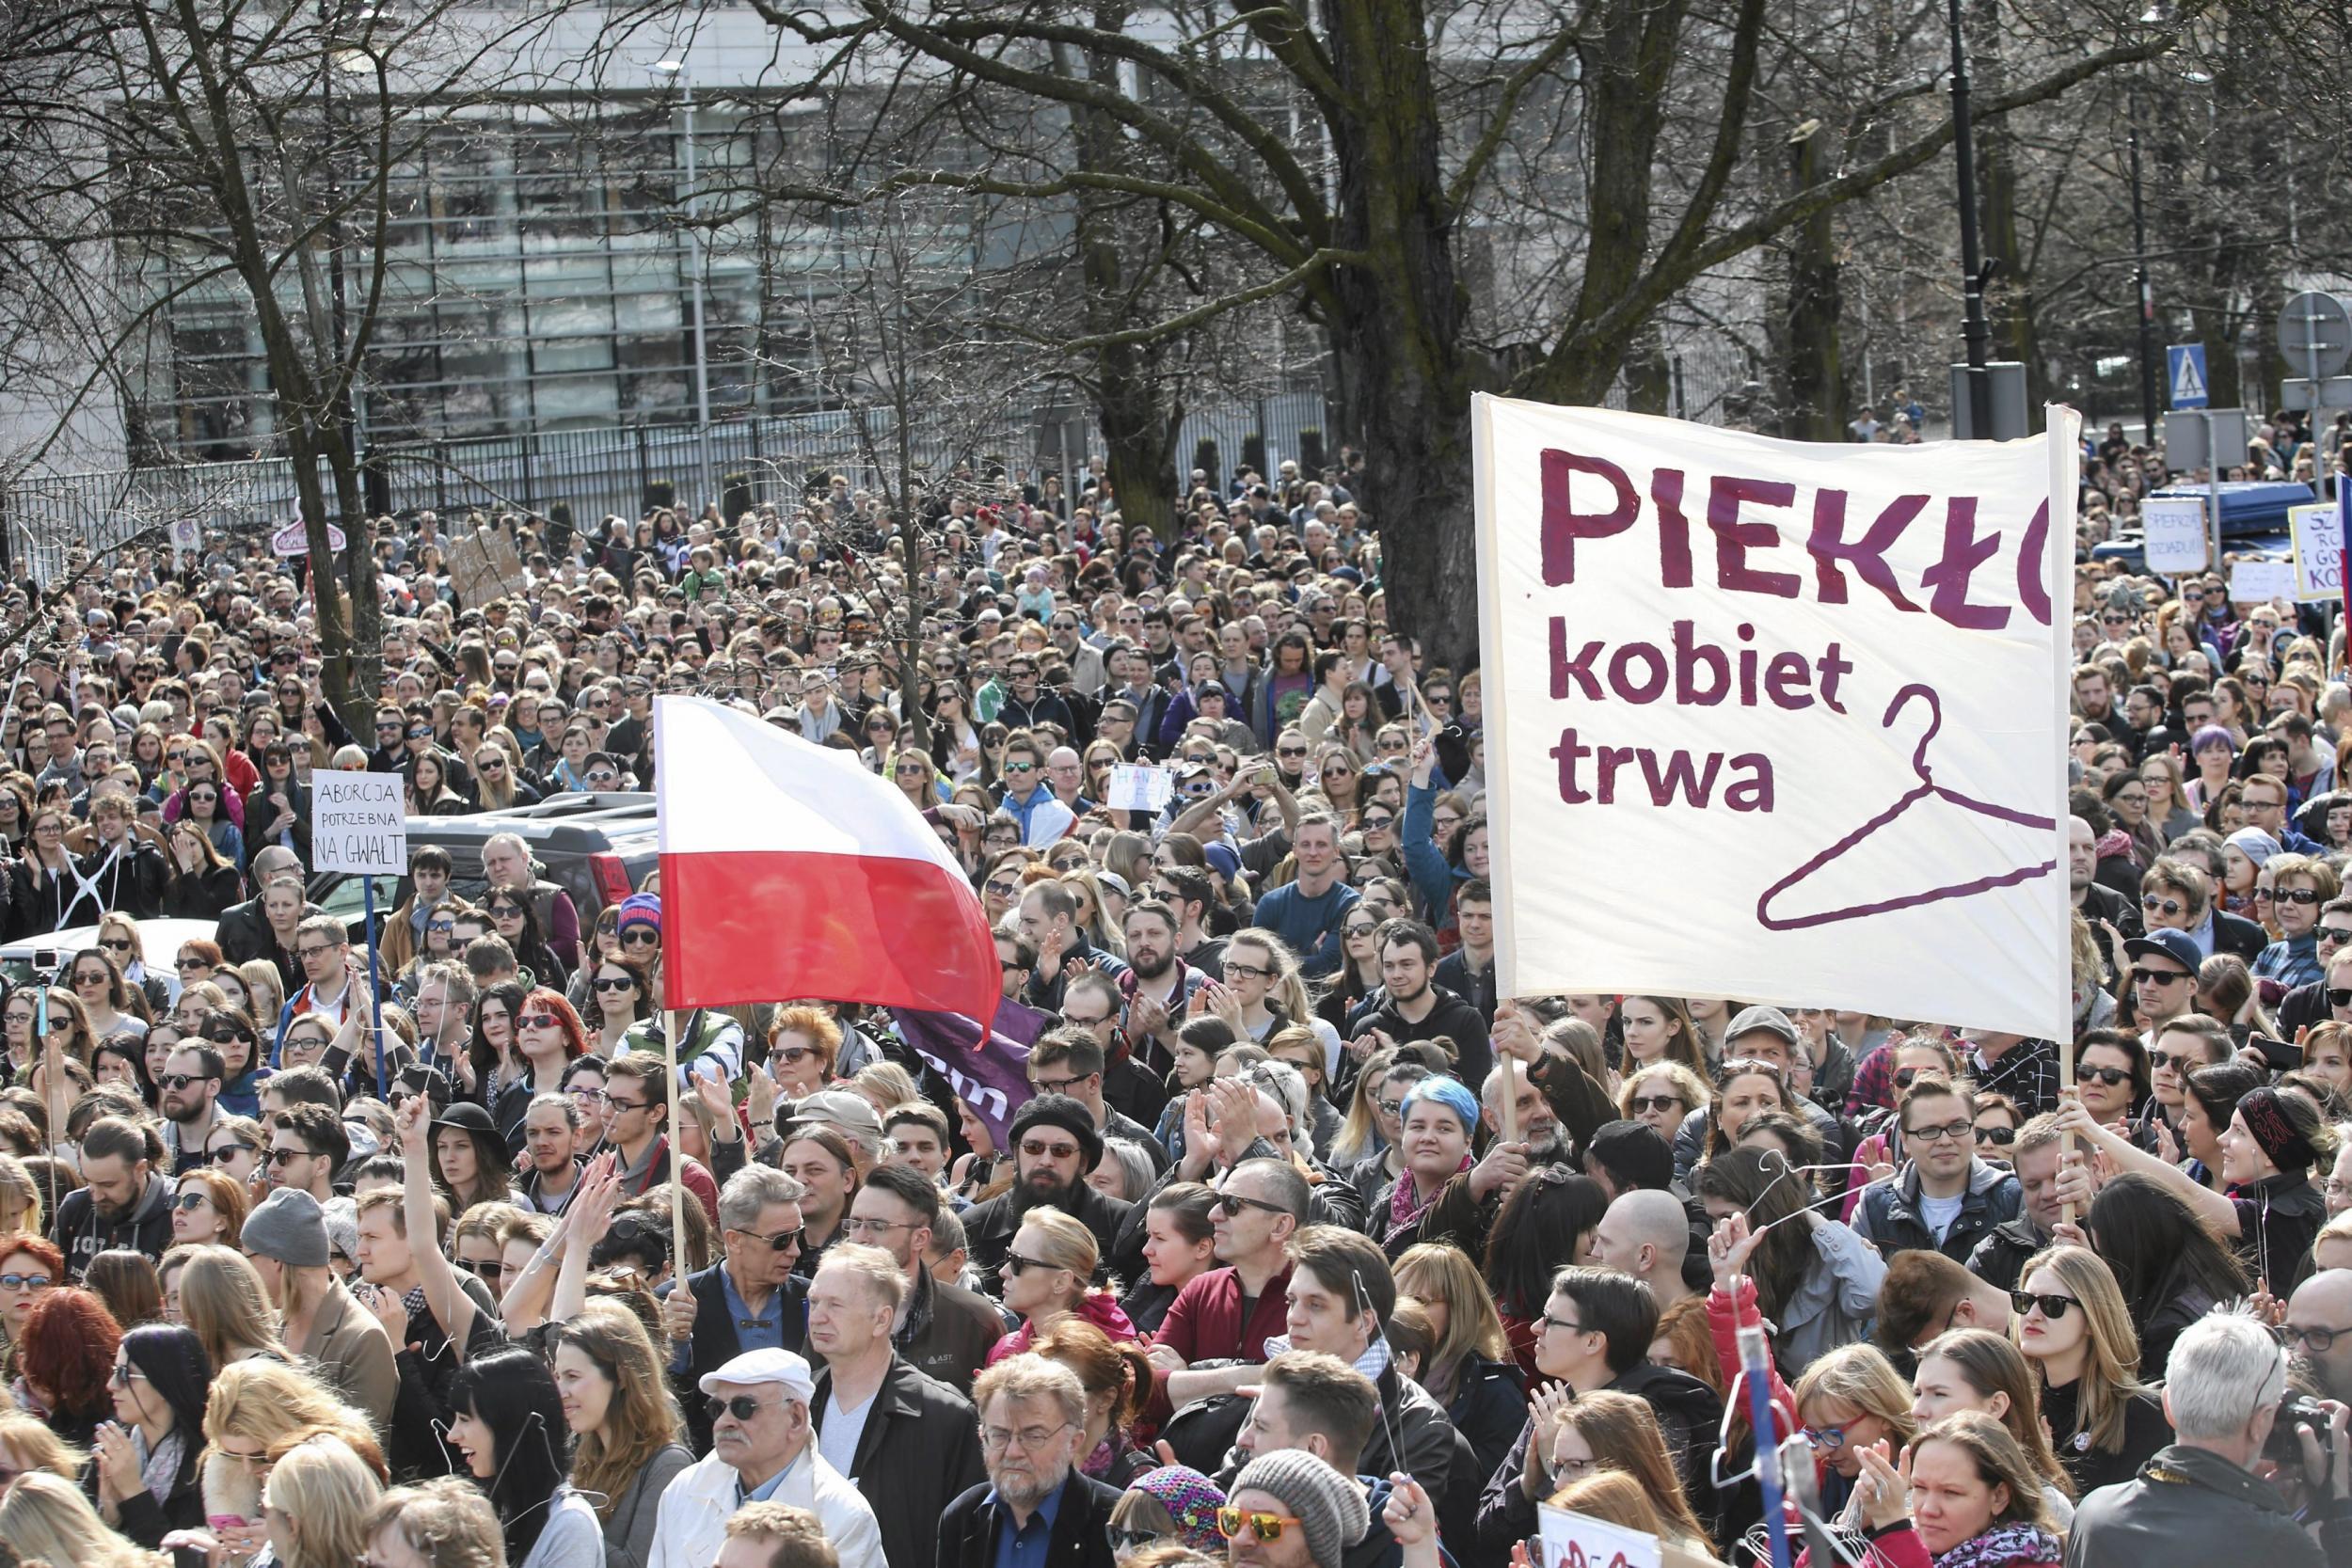 People demonstrate against the Polish government's plan of tightening the abortion law in front of the Parliament in Warsaw, Poland. The banner reads: "Hell of women continues".